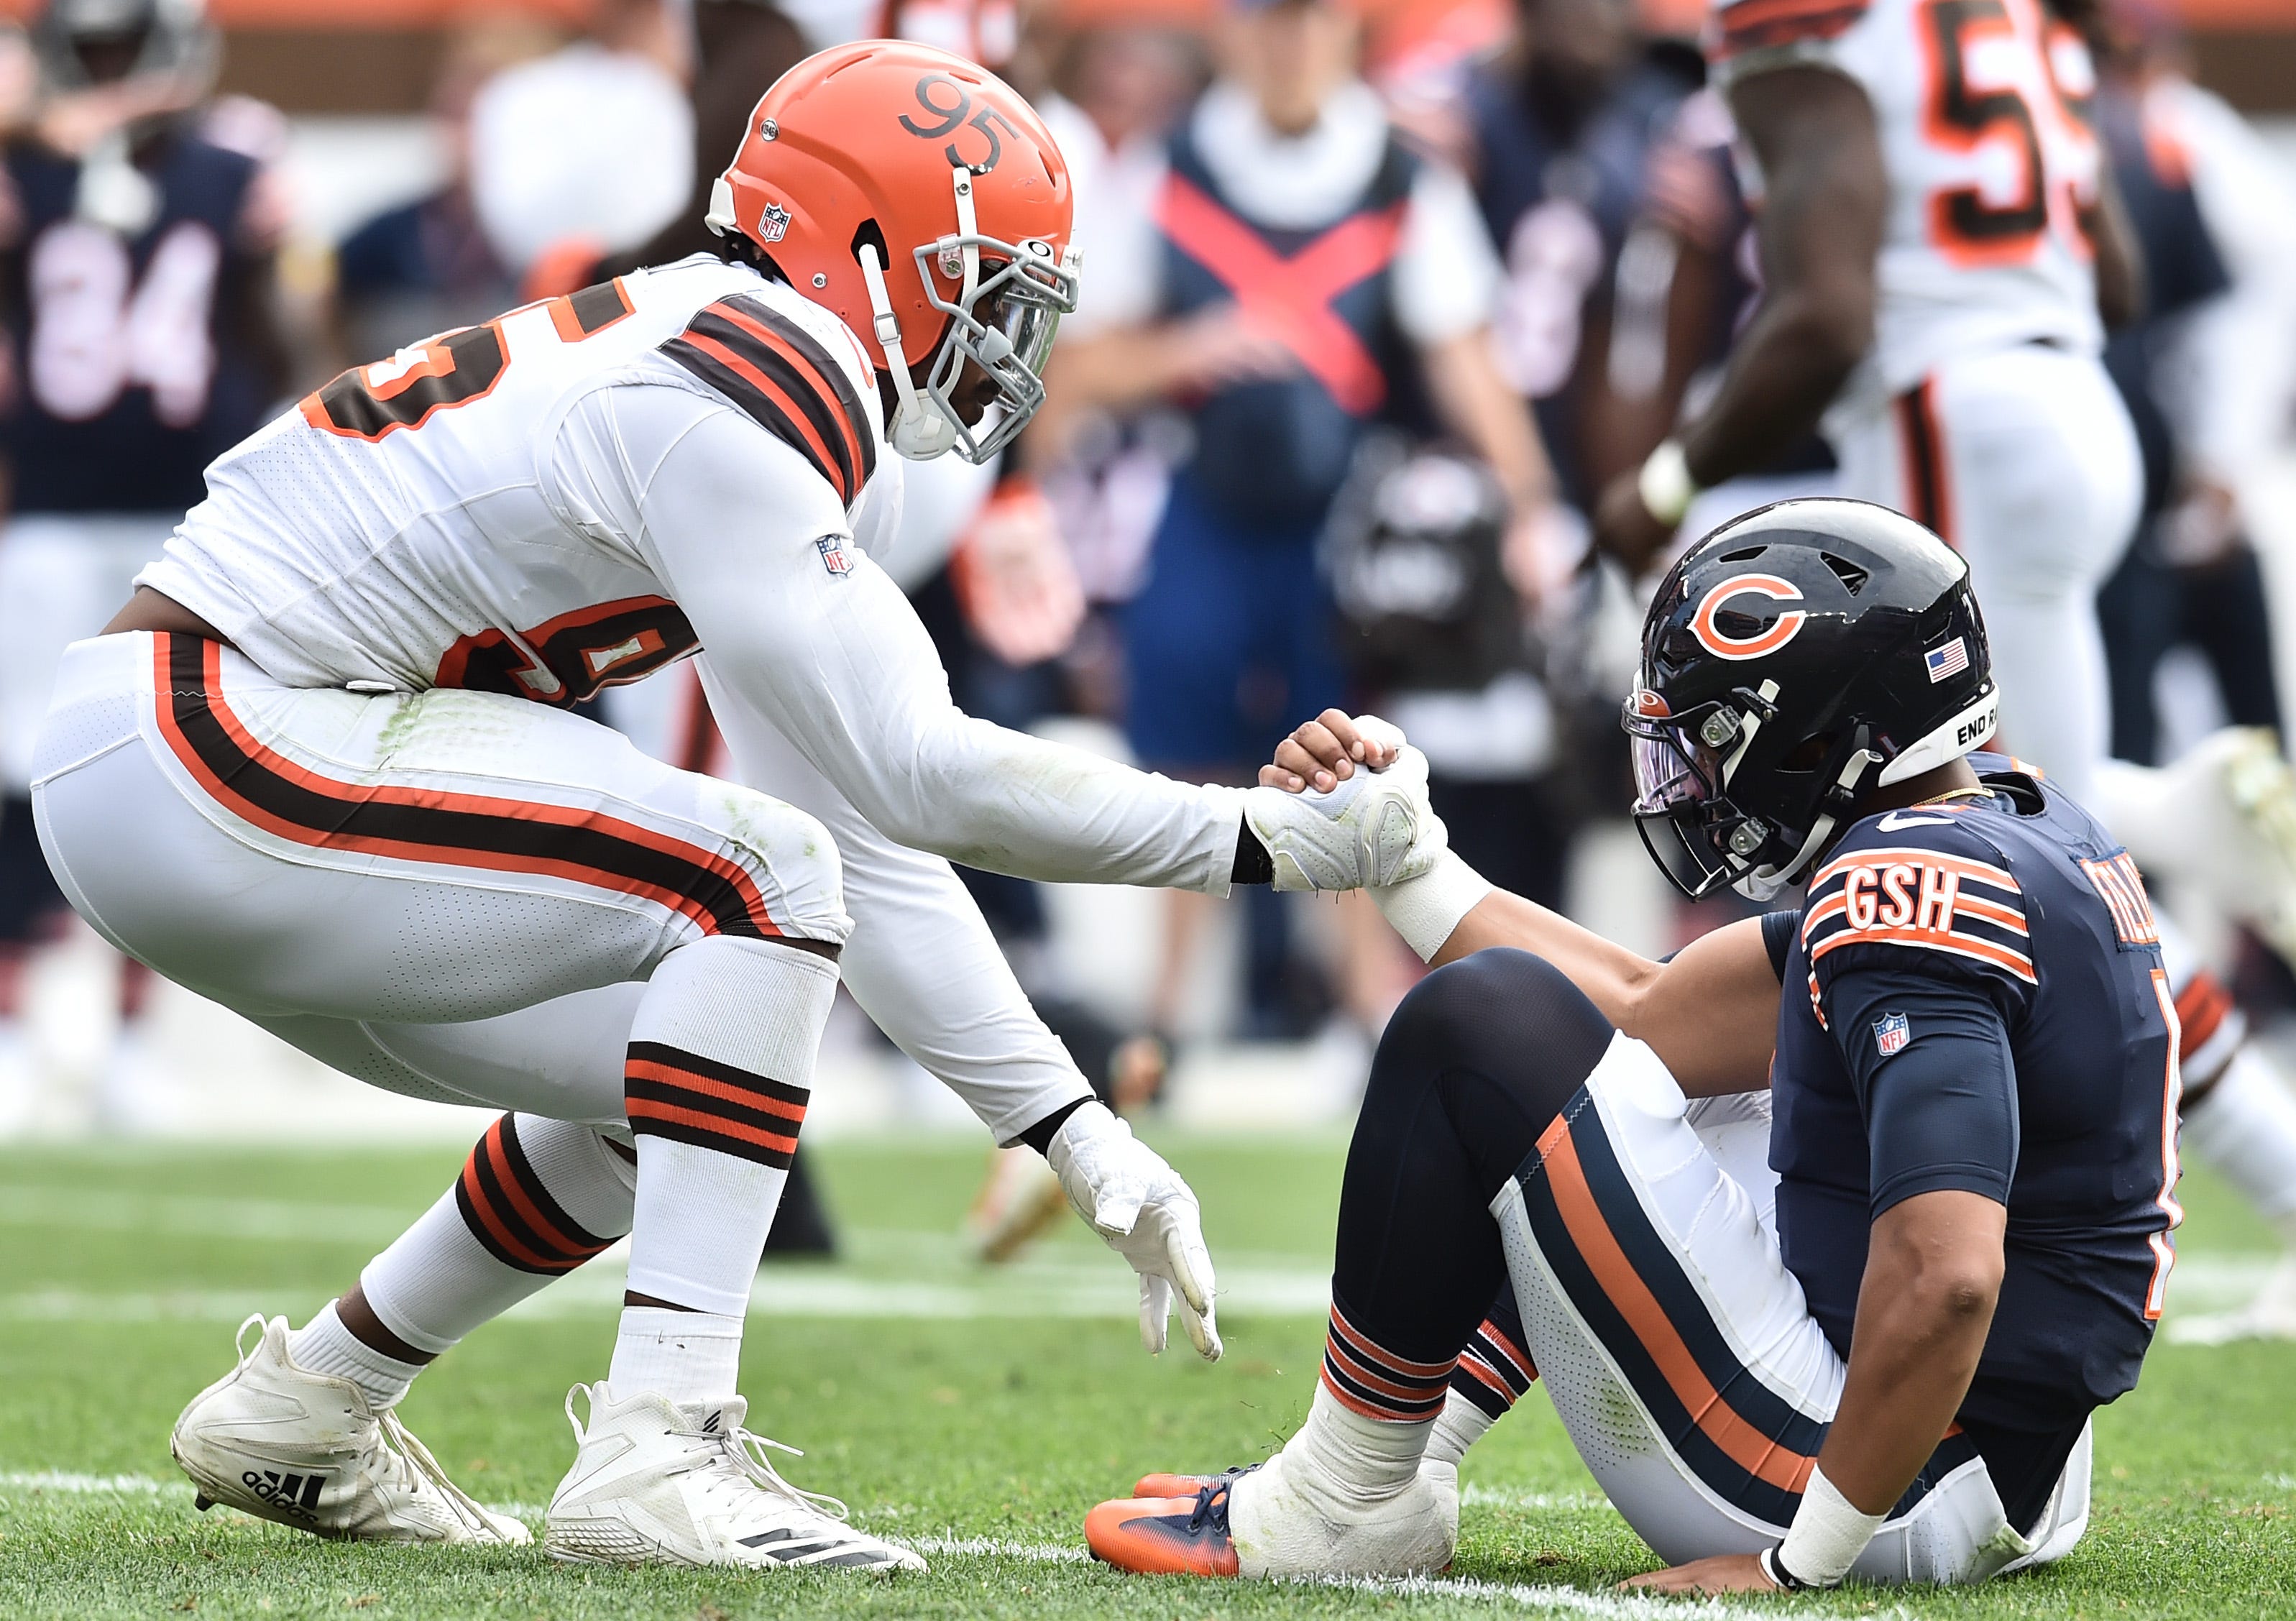 Browns set franchise record with 5th gamewinning score in final 2 minutes